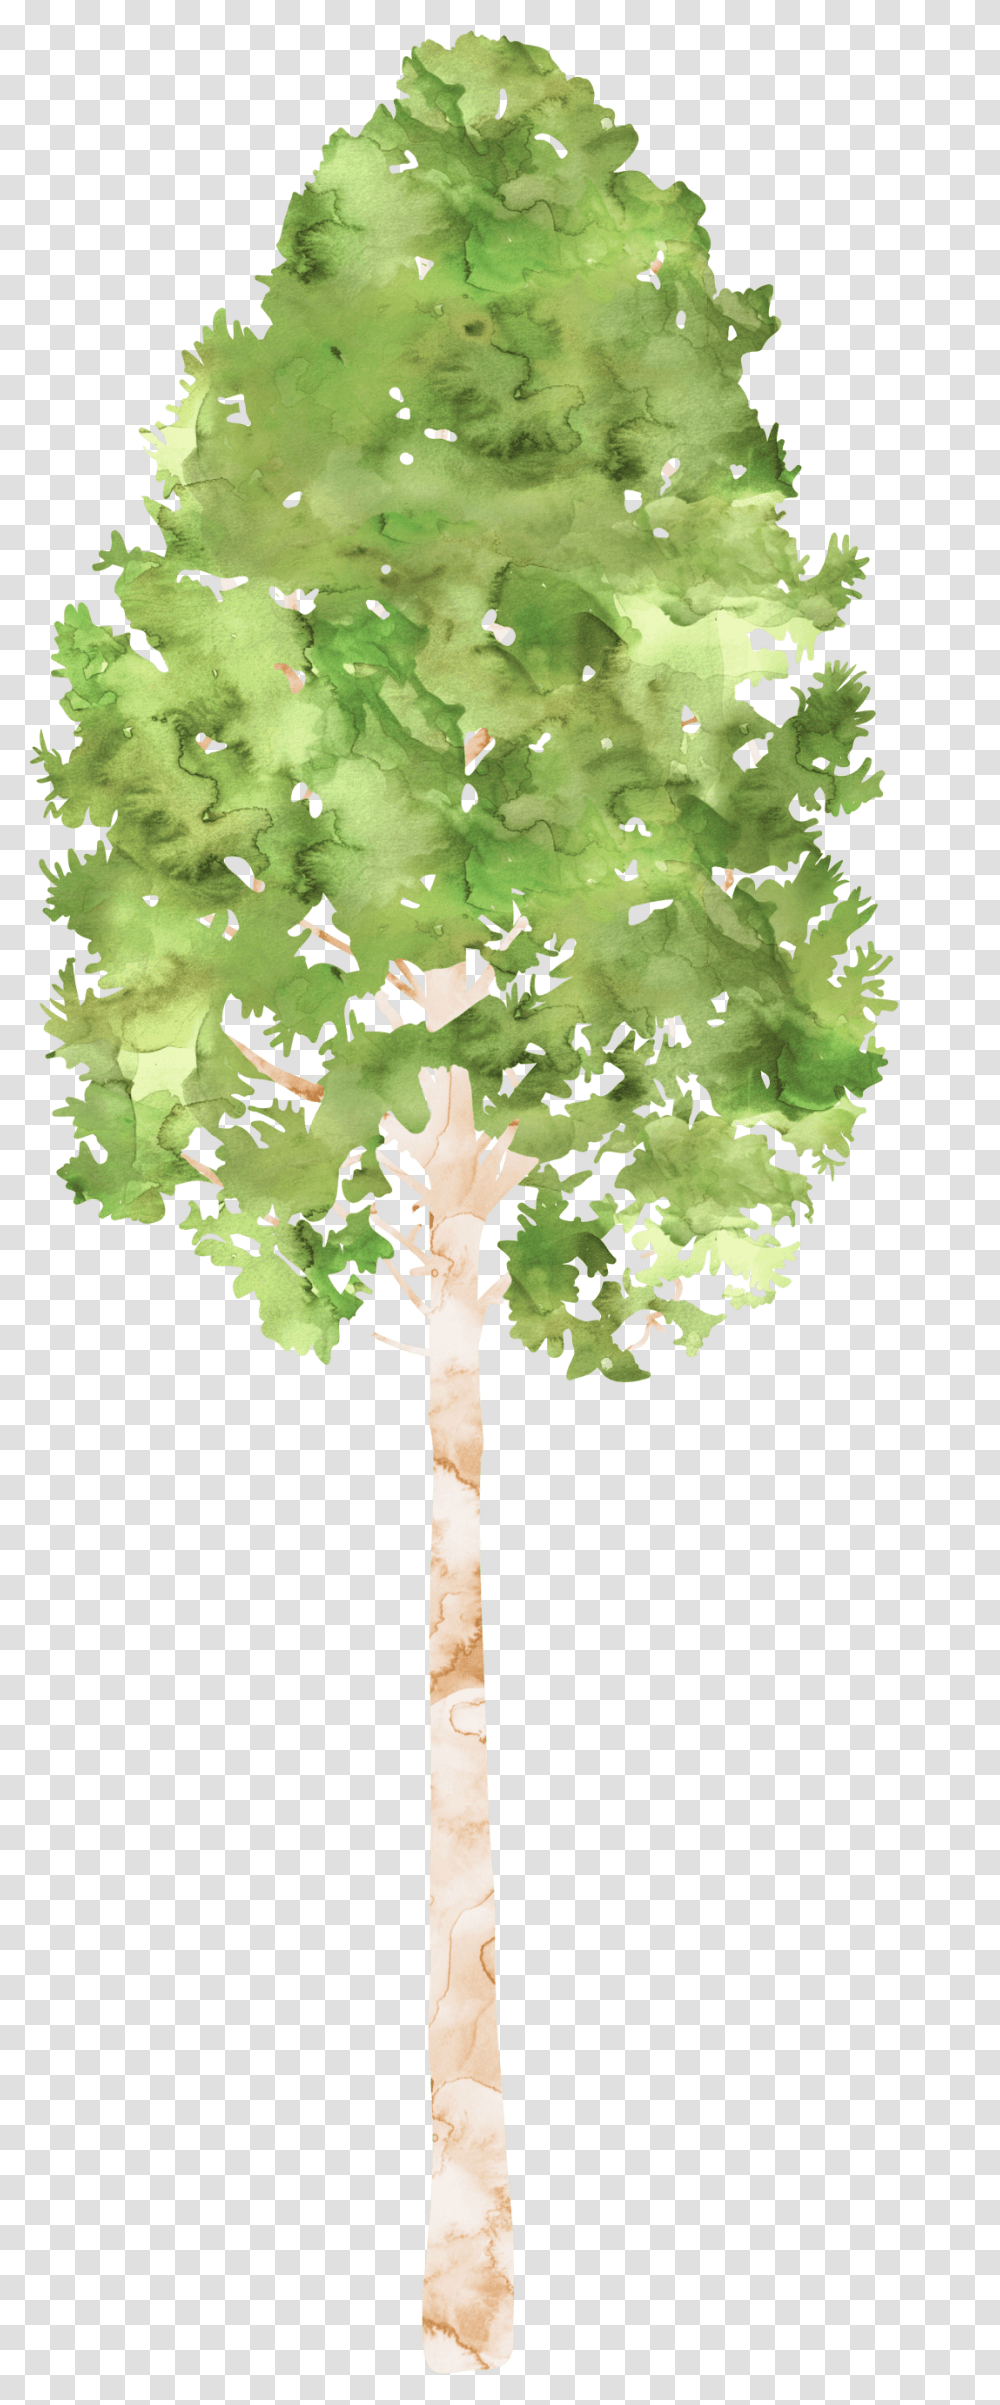 Camping Trees Clipart Canoe Birch, Plant, Leaf, Maple, Tree Trunk Transparent Png